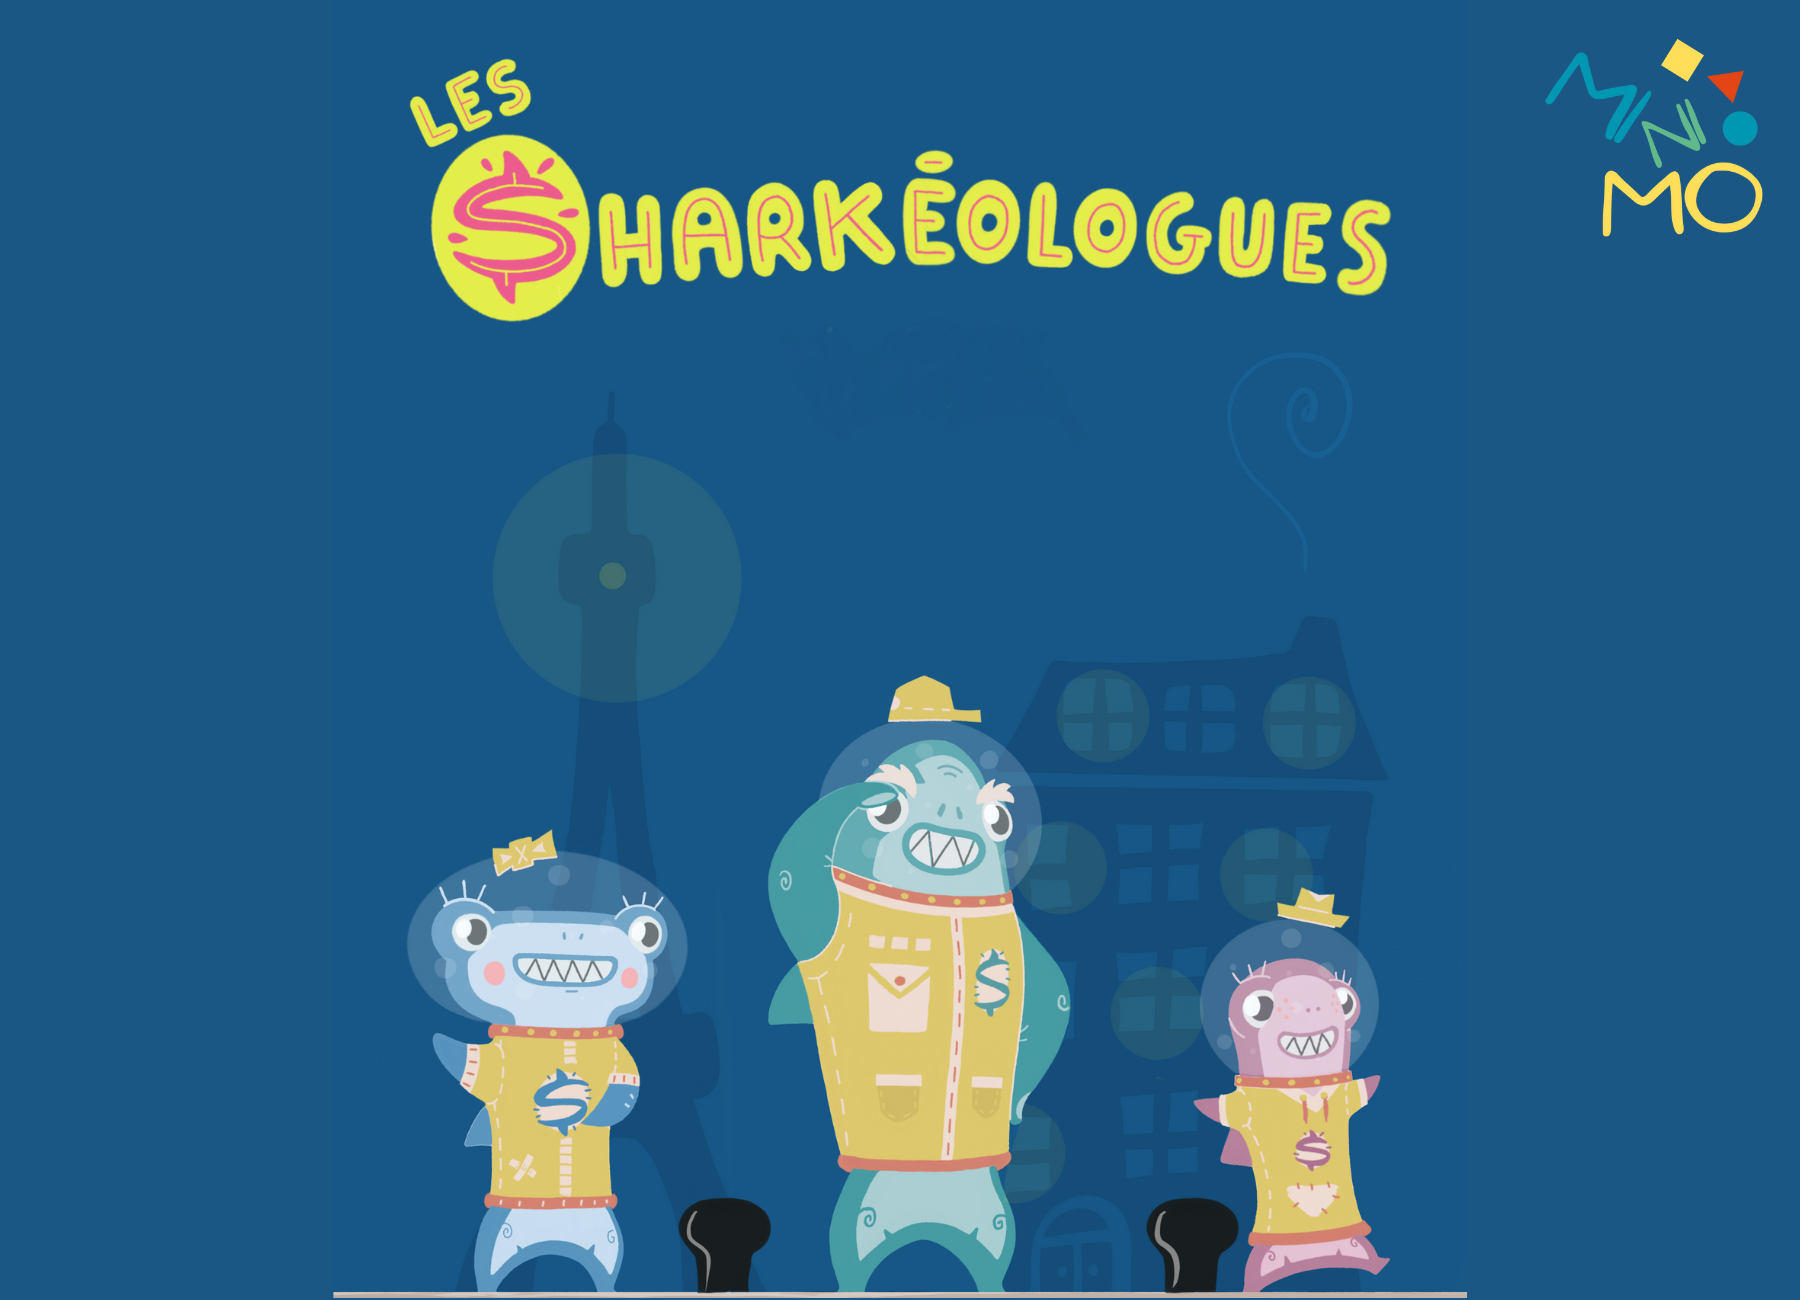 Listen to the adventures of “Les Sharkéologues”